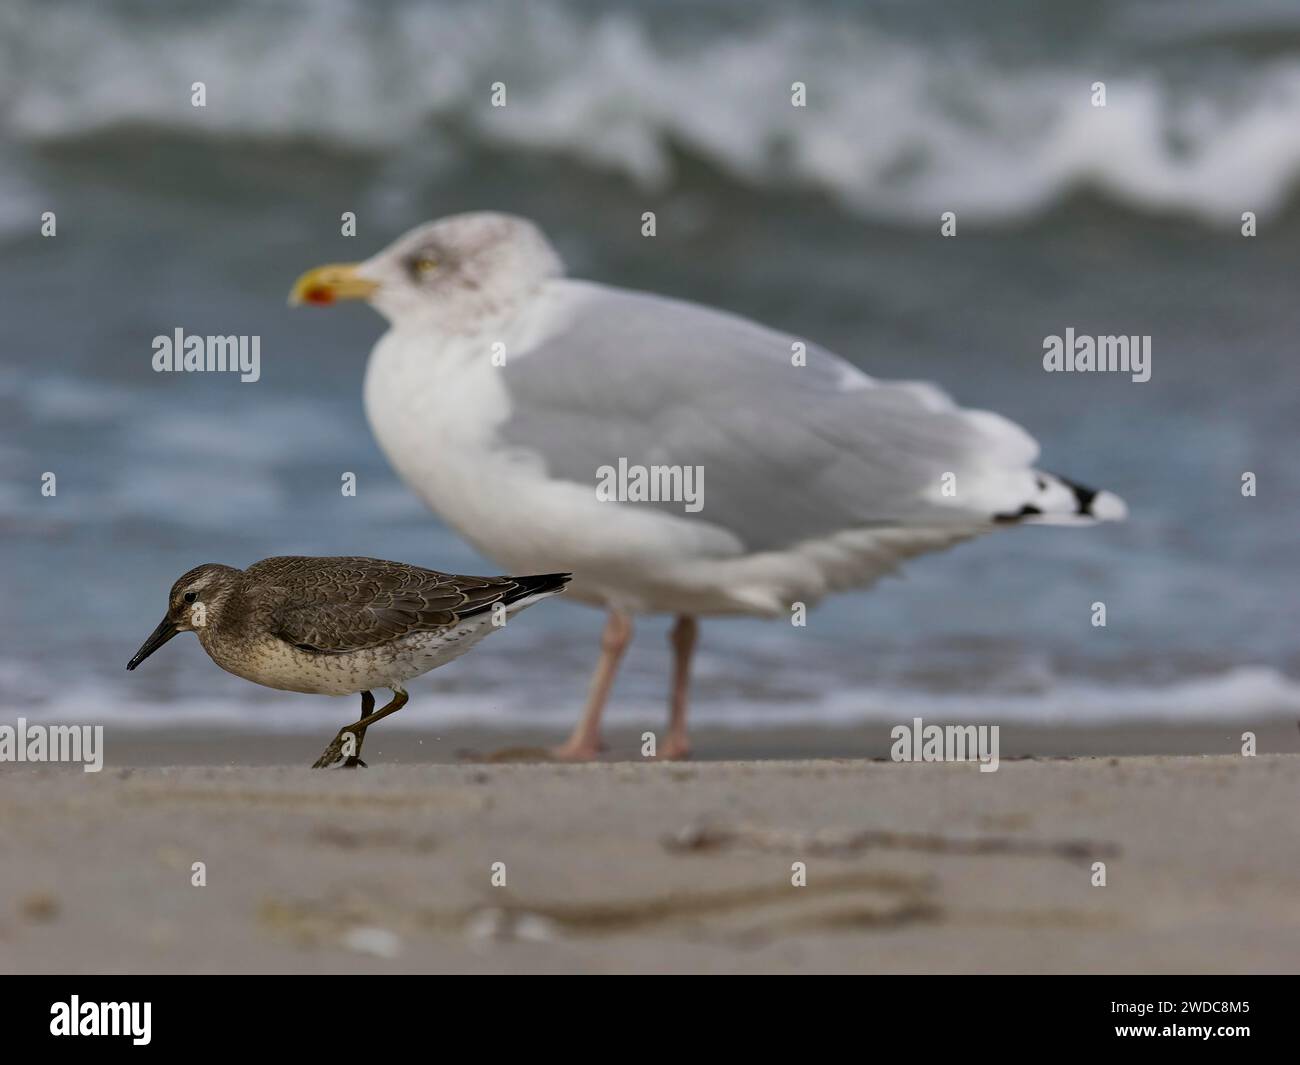 A sandpiper and a gull standing on a sandy beach with waves in the background, a knot foraging in front of a herring gull Stock Photo